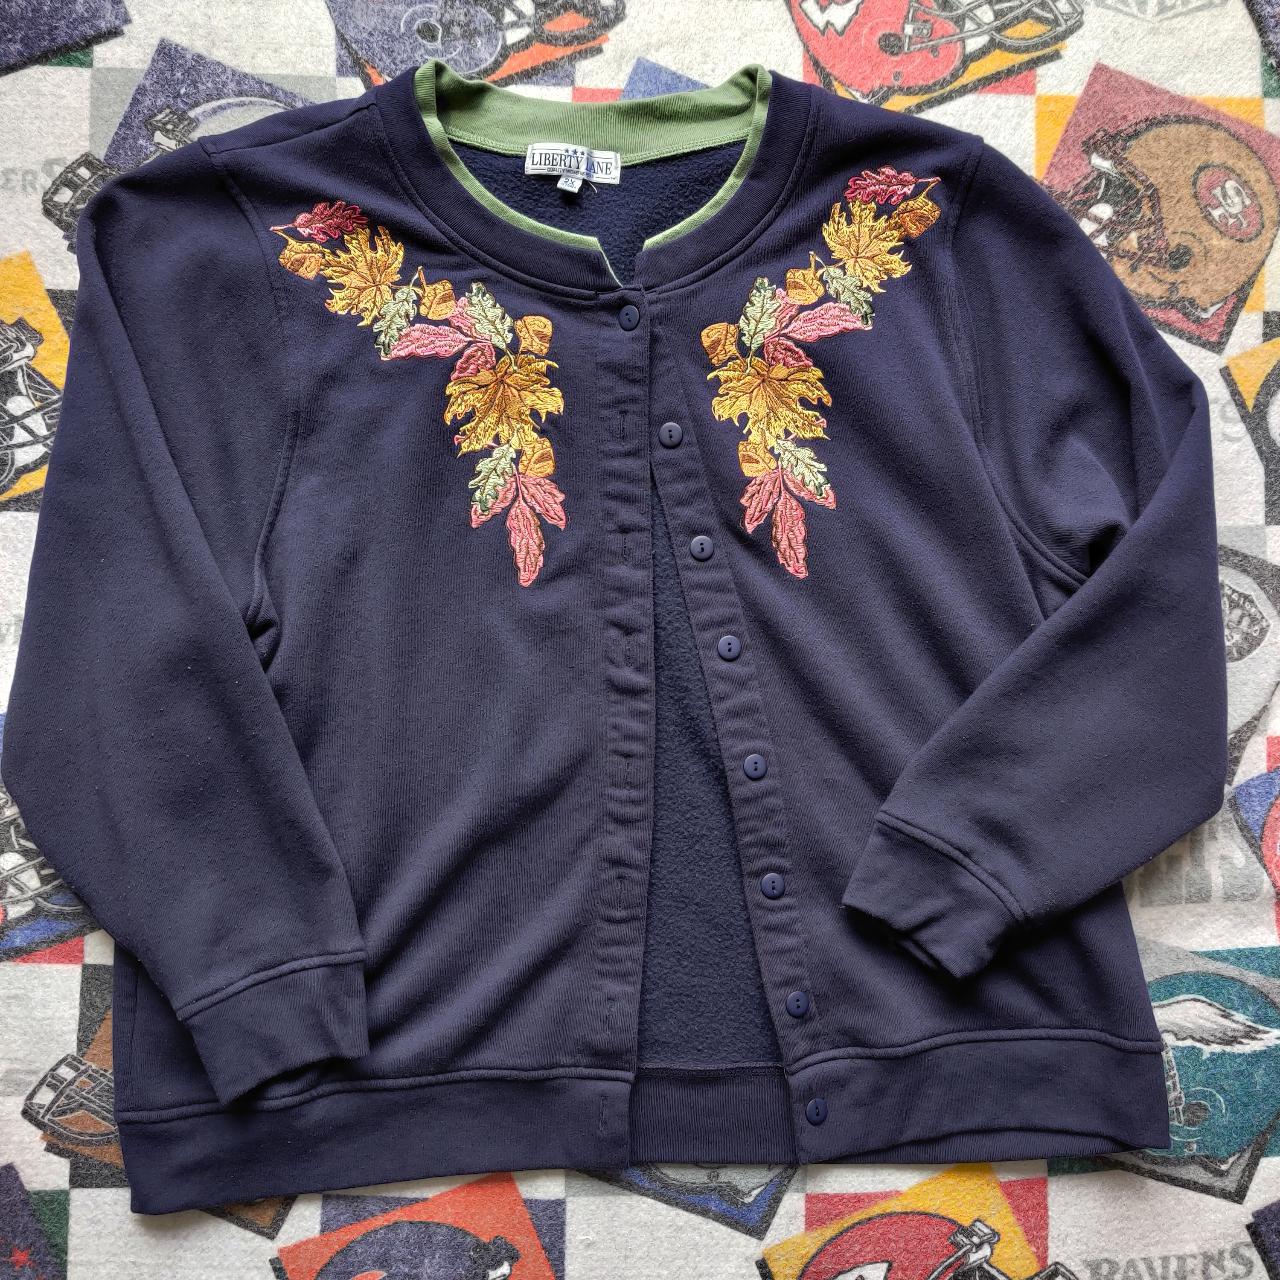 Product Image 1 - Vintage 90's Embroidered Leaves Cardigan